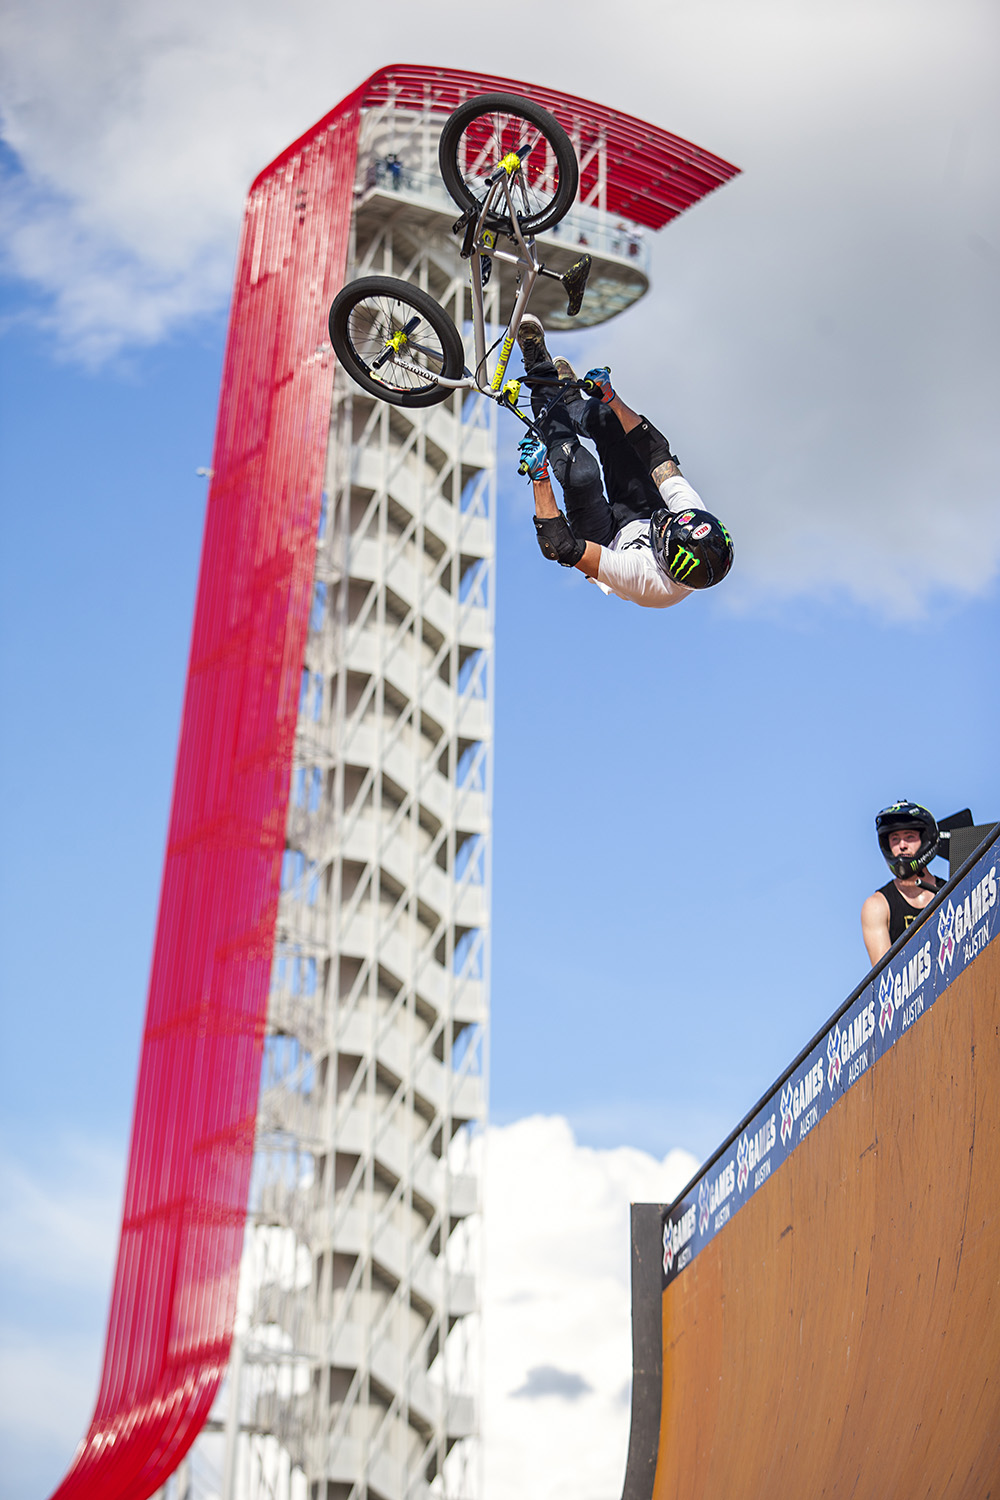 Monster Energy’s Jamie Bestwick Reclaims Gold in BMX Vert at X Games Austin 2016 and Wins his 14th Gold Medal